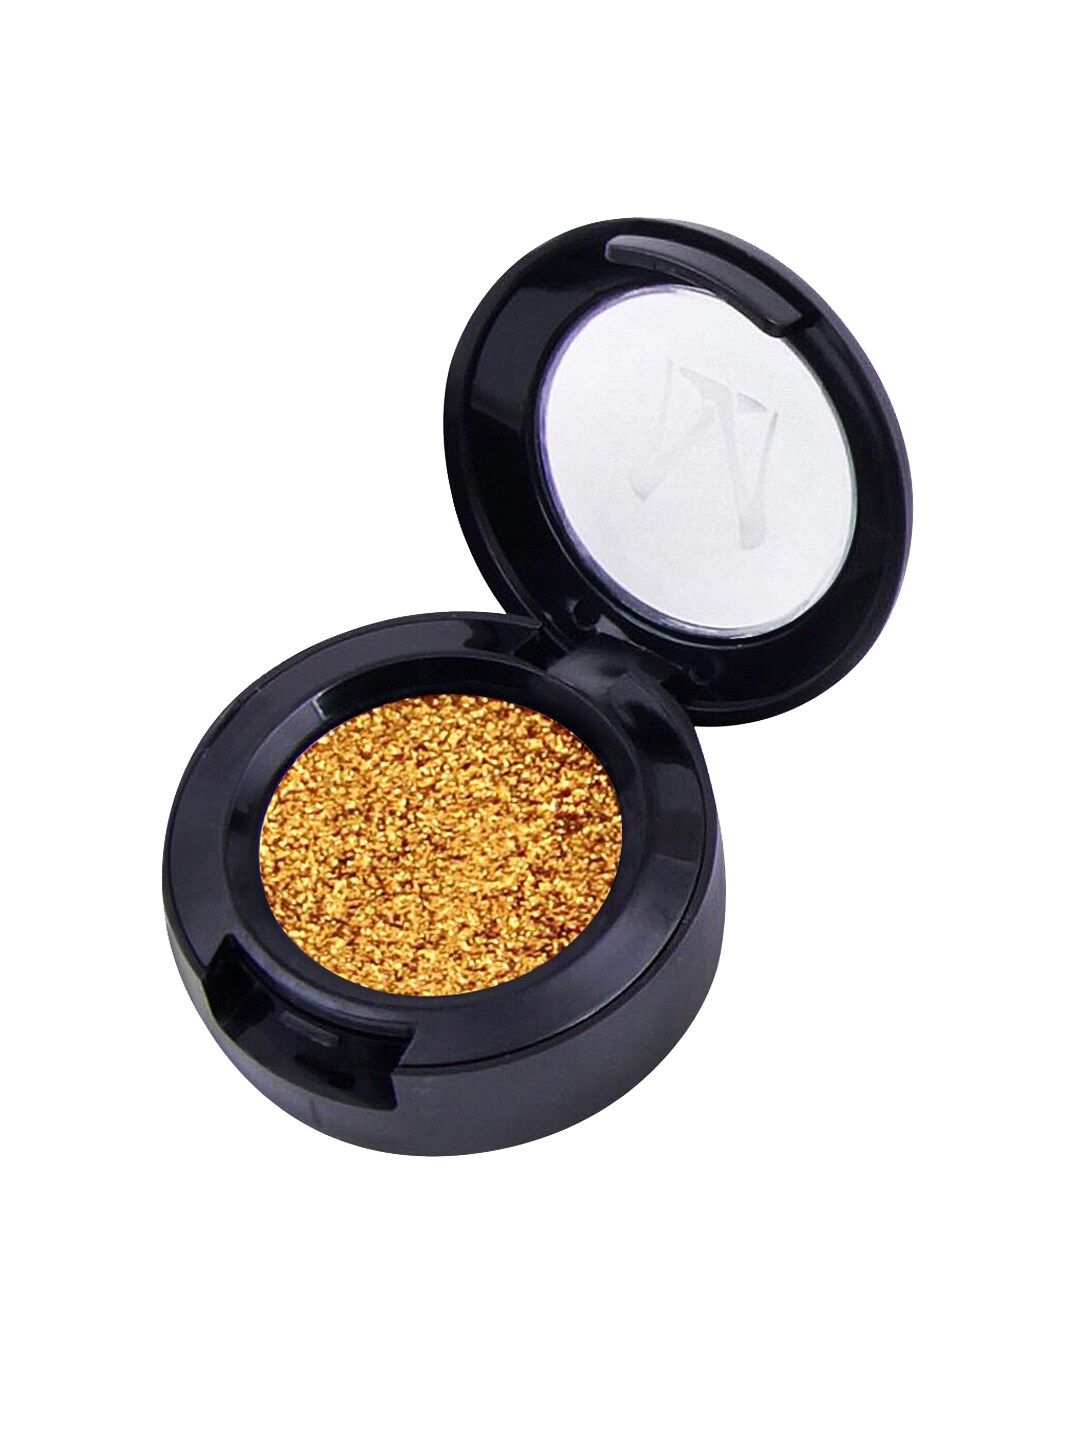 MISS ROSE Single Color Eyeshadow Shining Glitter Glow Tan Pigment 7001-074 16 20g Price in India